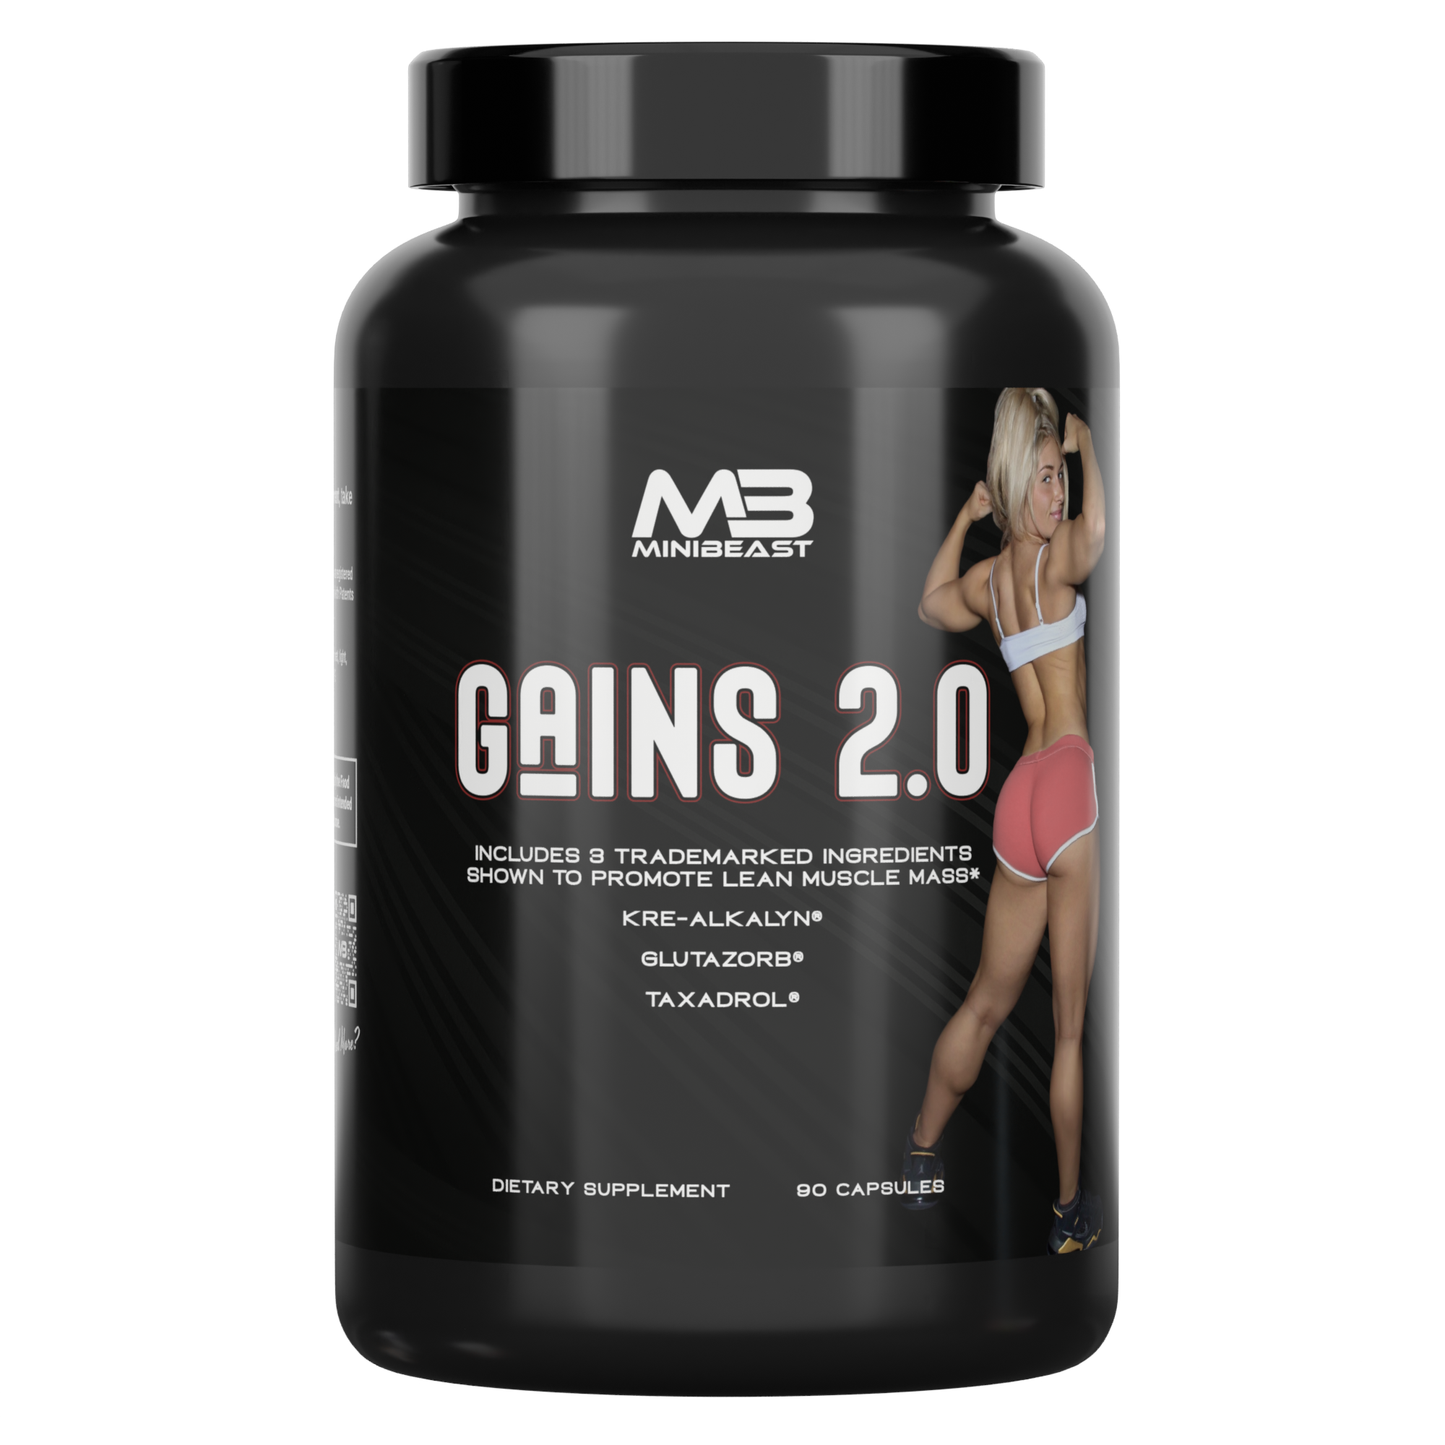 Gains 2.0 (Muscle Builder)